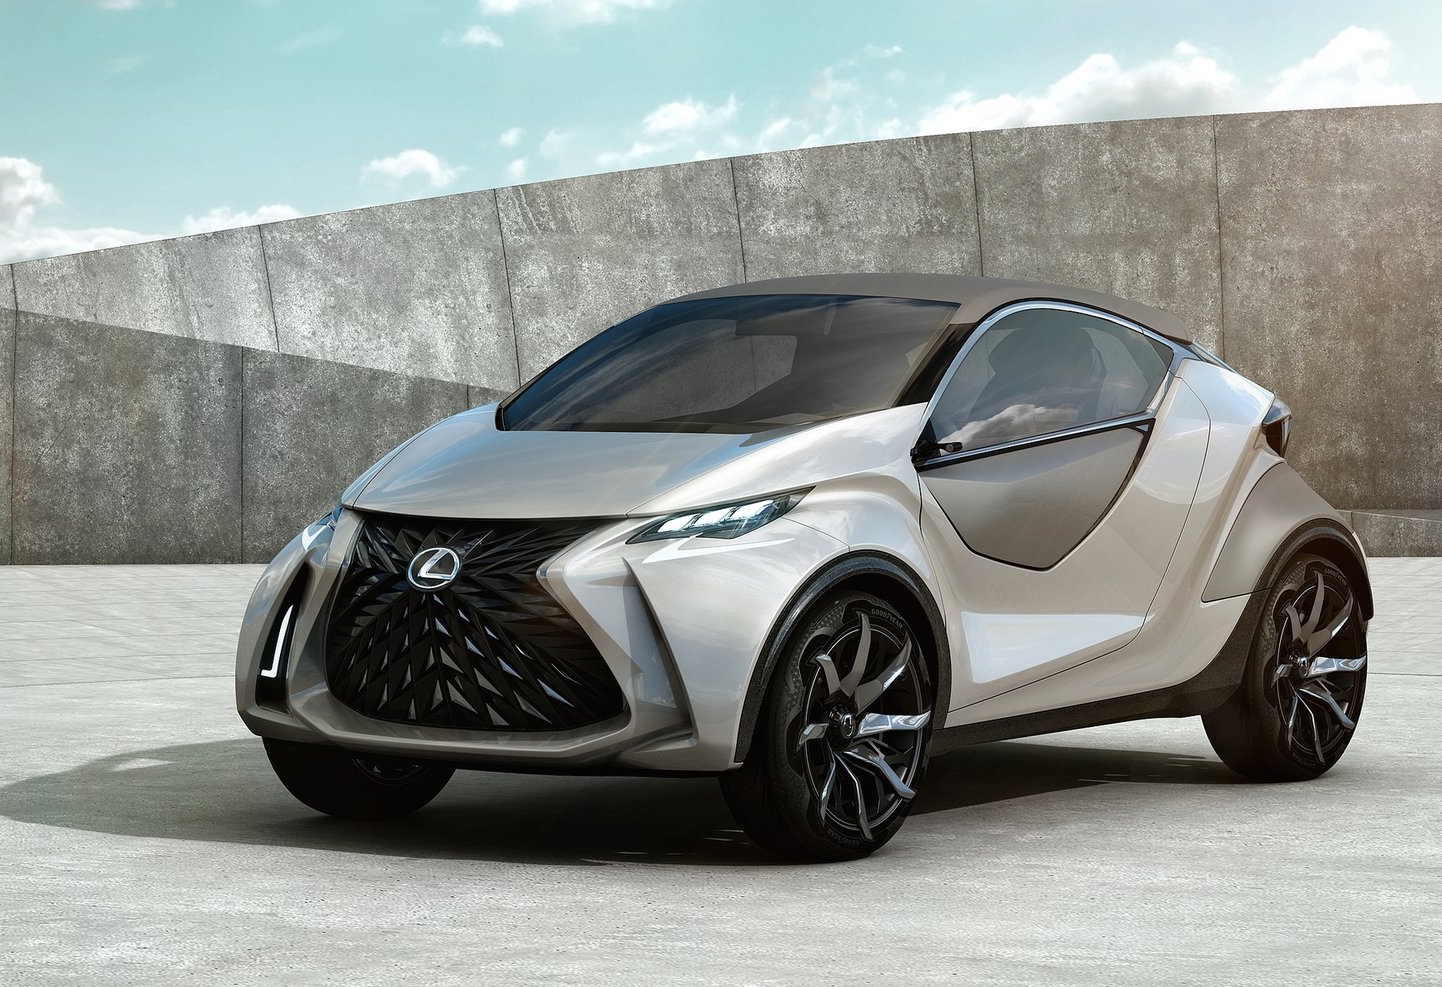 Lexus planning new city car, inspired by LF-SA concept?